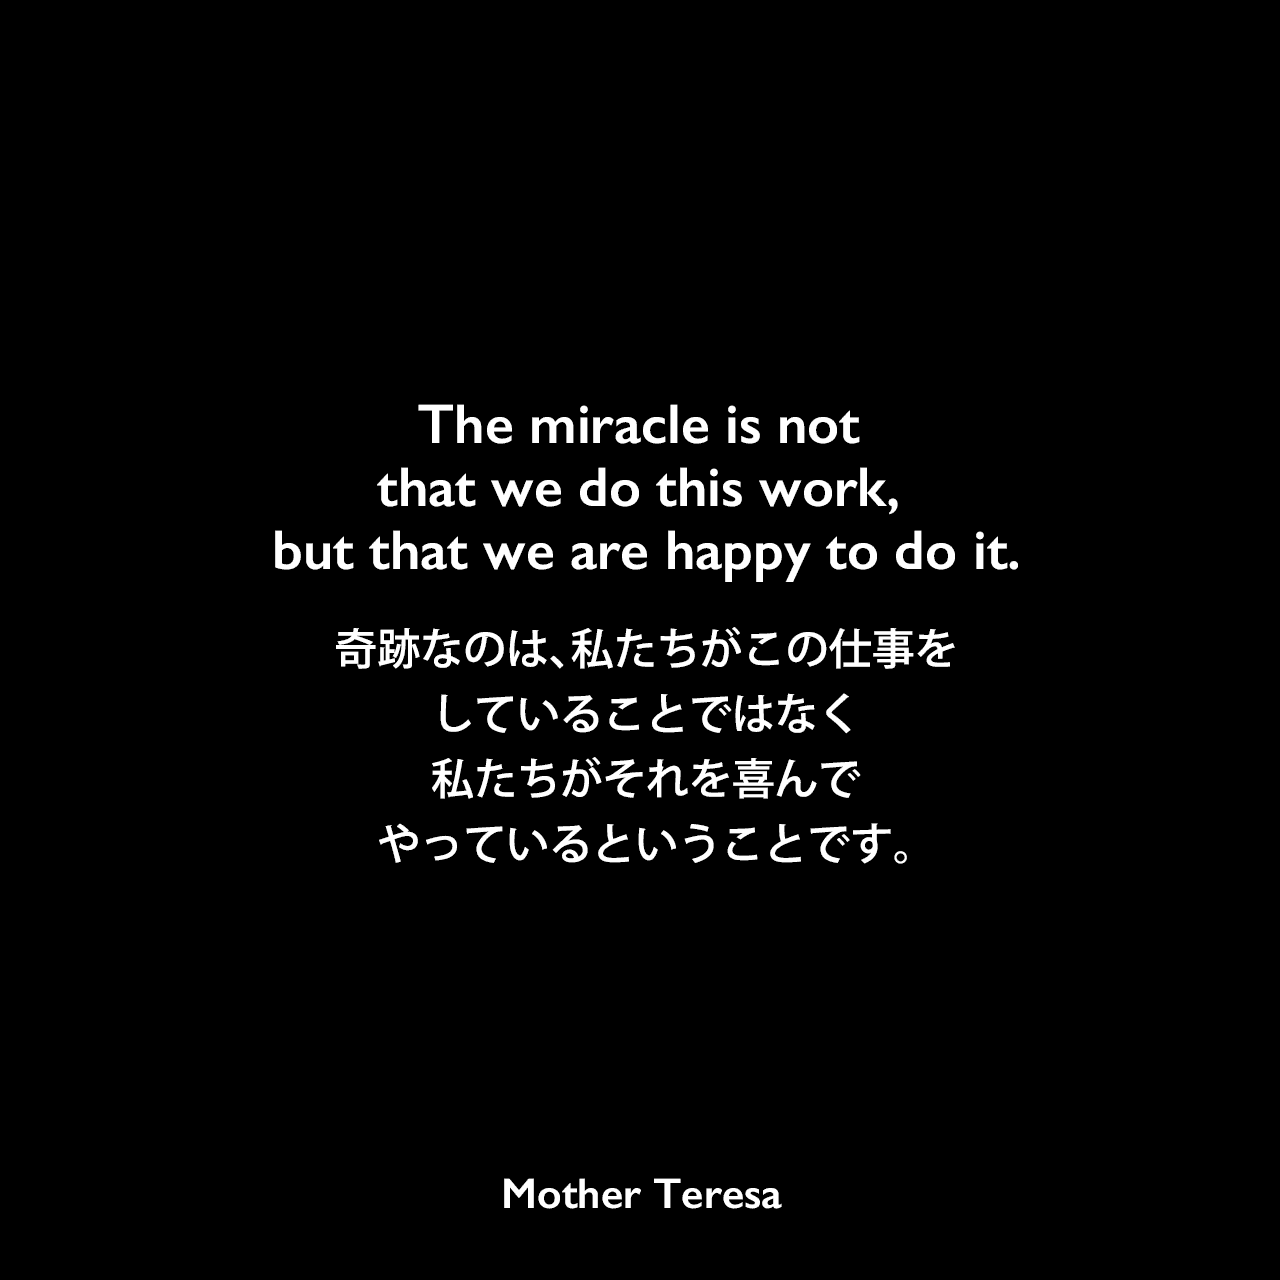 The miracle is not that we do this work, but that we are happy to do it.奇跡なのは、私たちがこの仕事をしていることではなく、私たちがそれを喜んでやっているということです。Mother Teresa